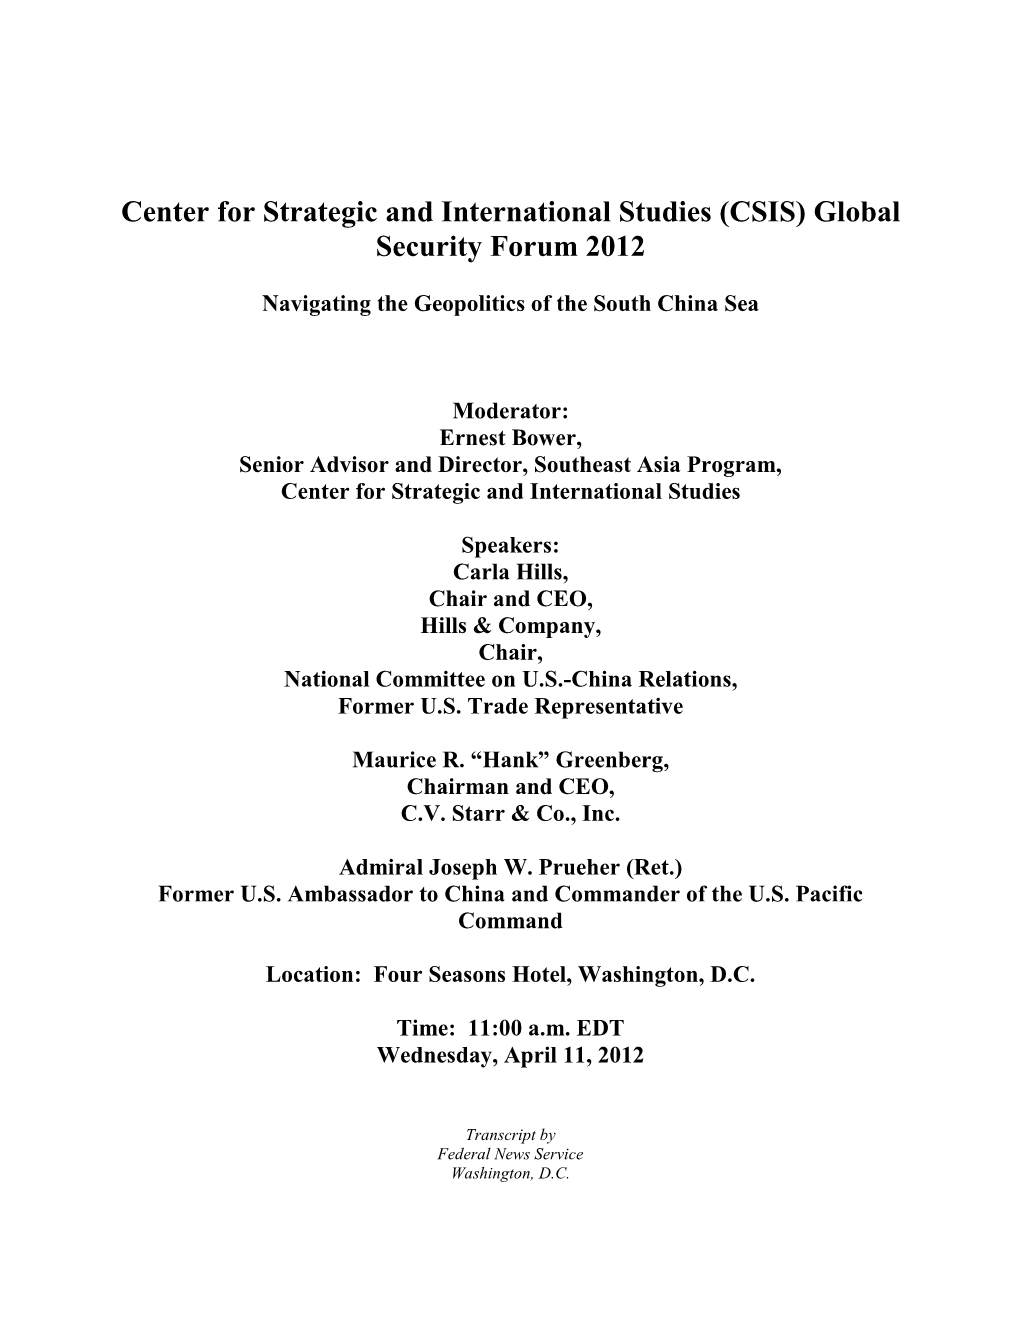 Center for Strategic and International Studies (CSIS) Global Security Forum 2012